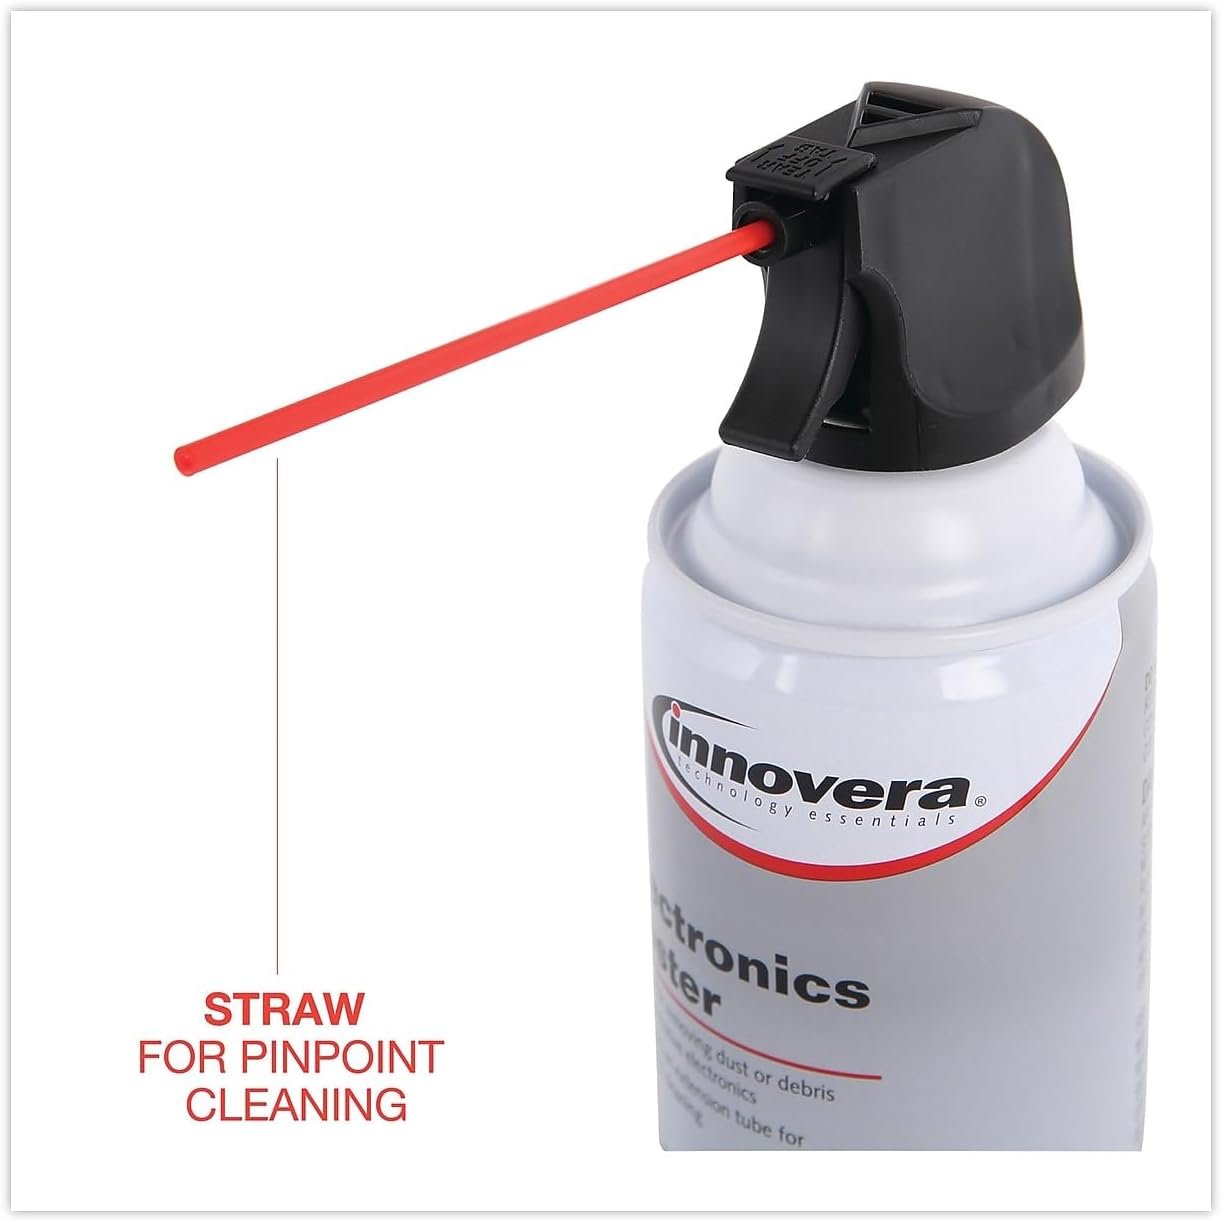 Innovera IVR10012 Air Duster Cleaner Review